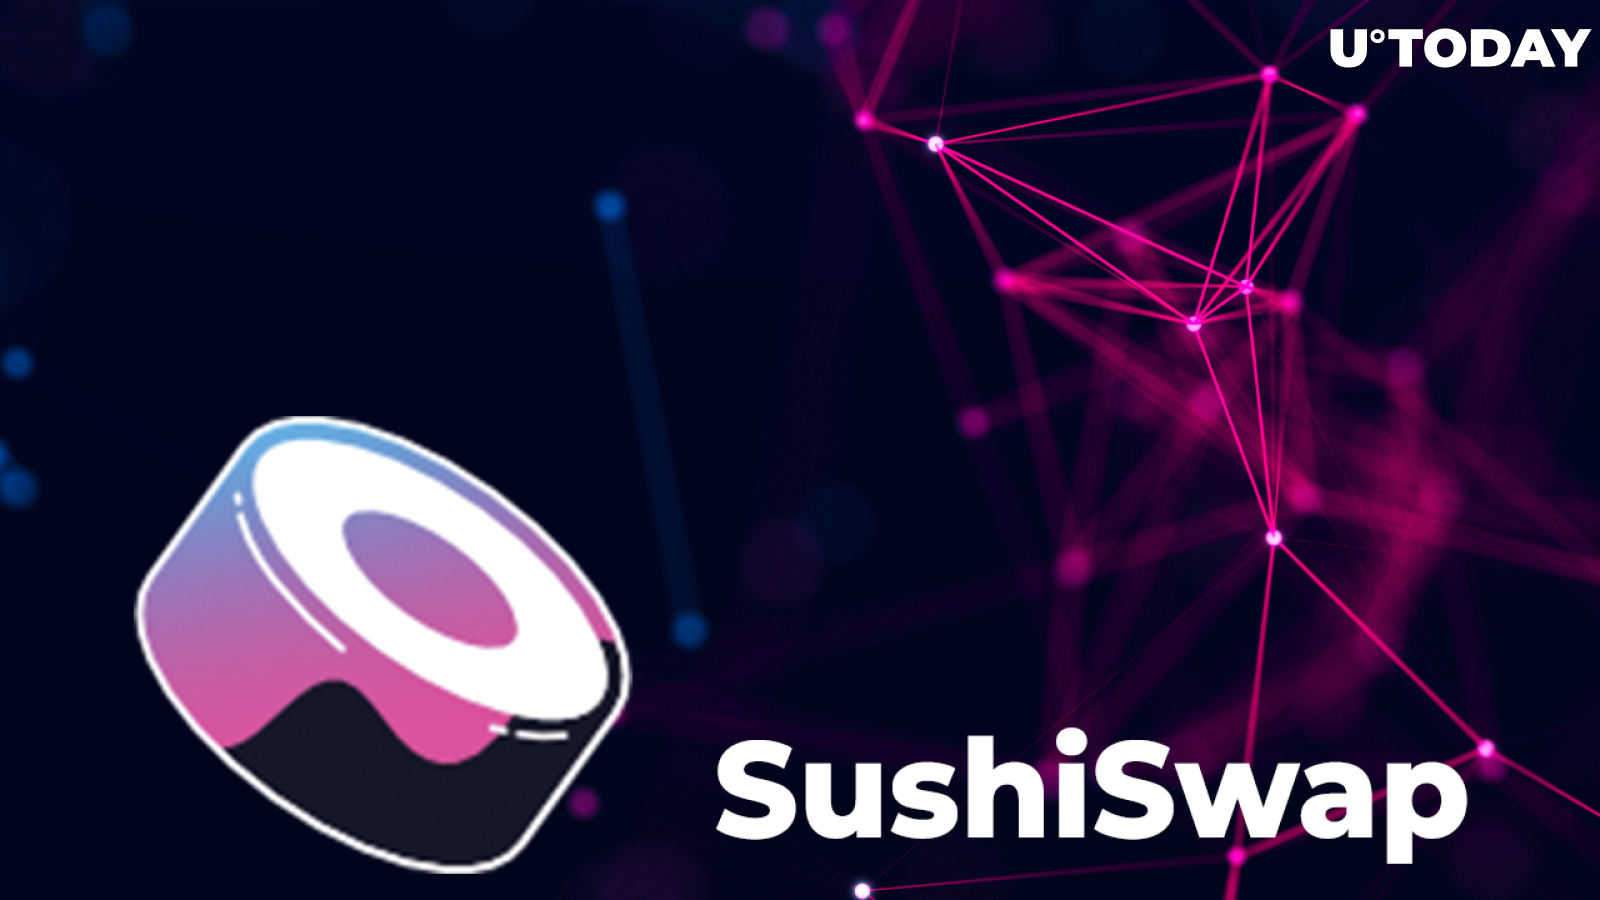 SushiSwap Presents New Vision of Project by Releasing Roadmap 2.0